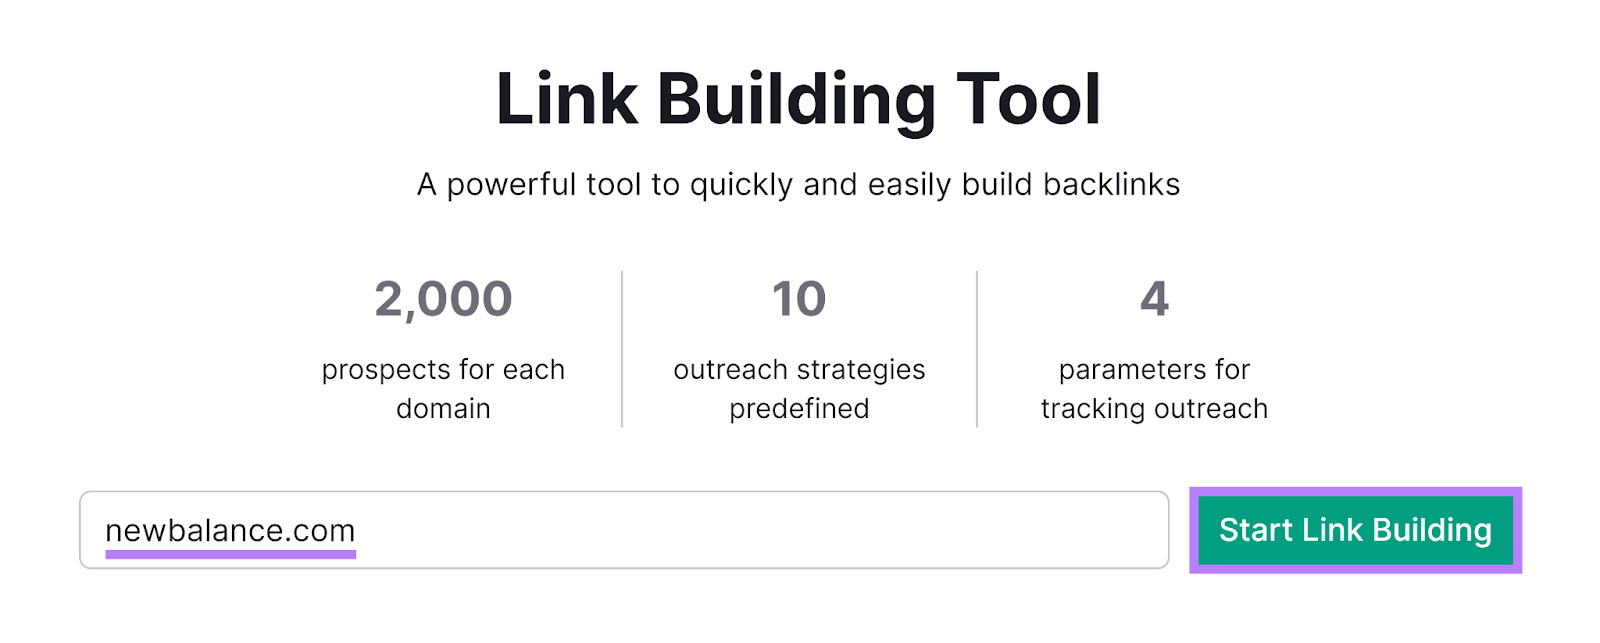 Link Building Tool start with domain entered and Start Link Building button highlighted.